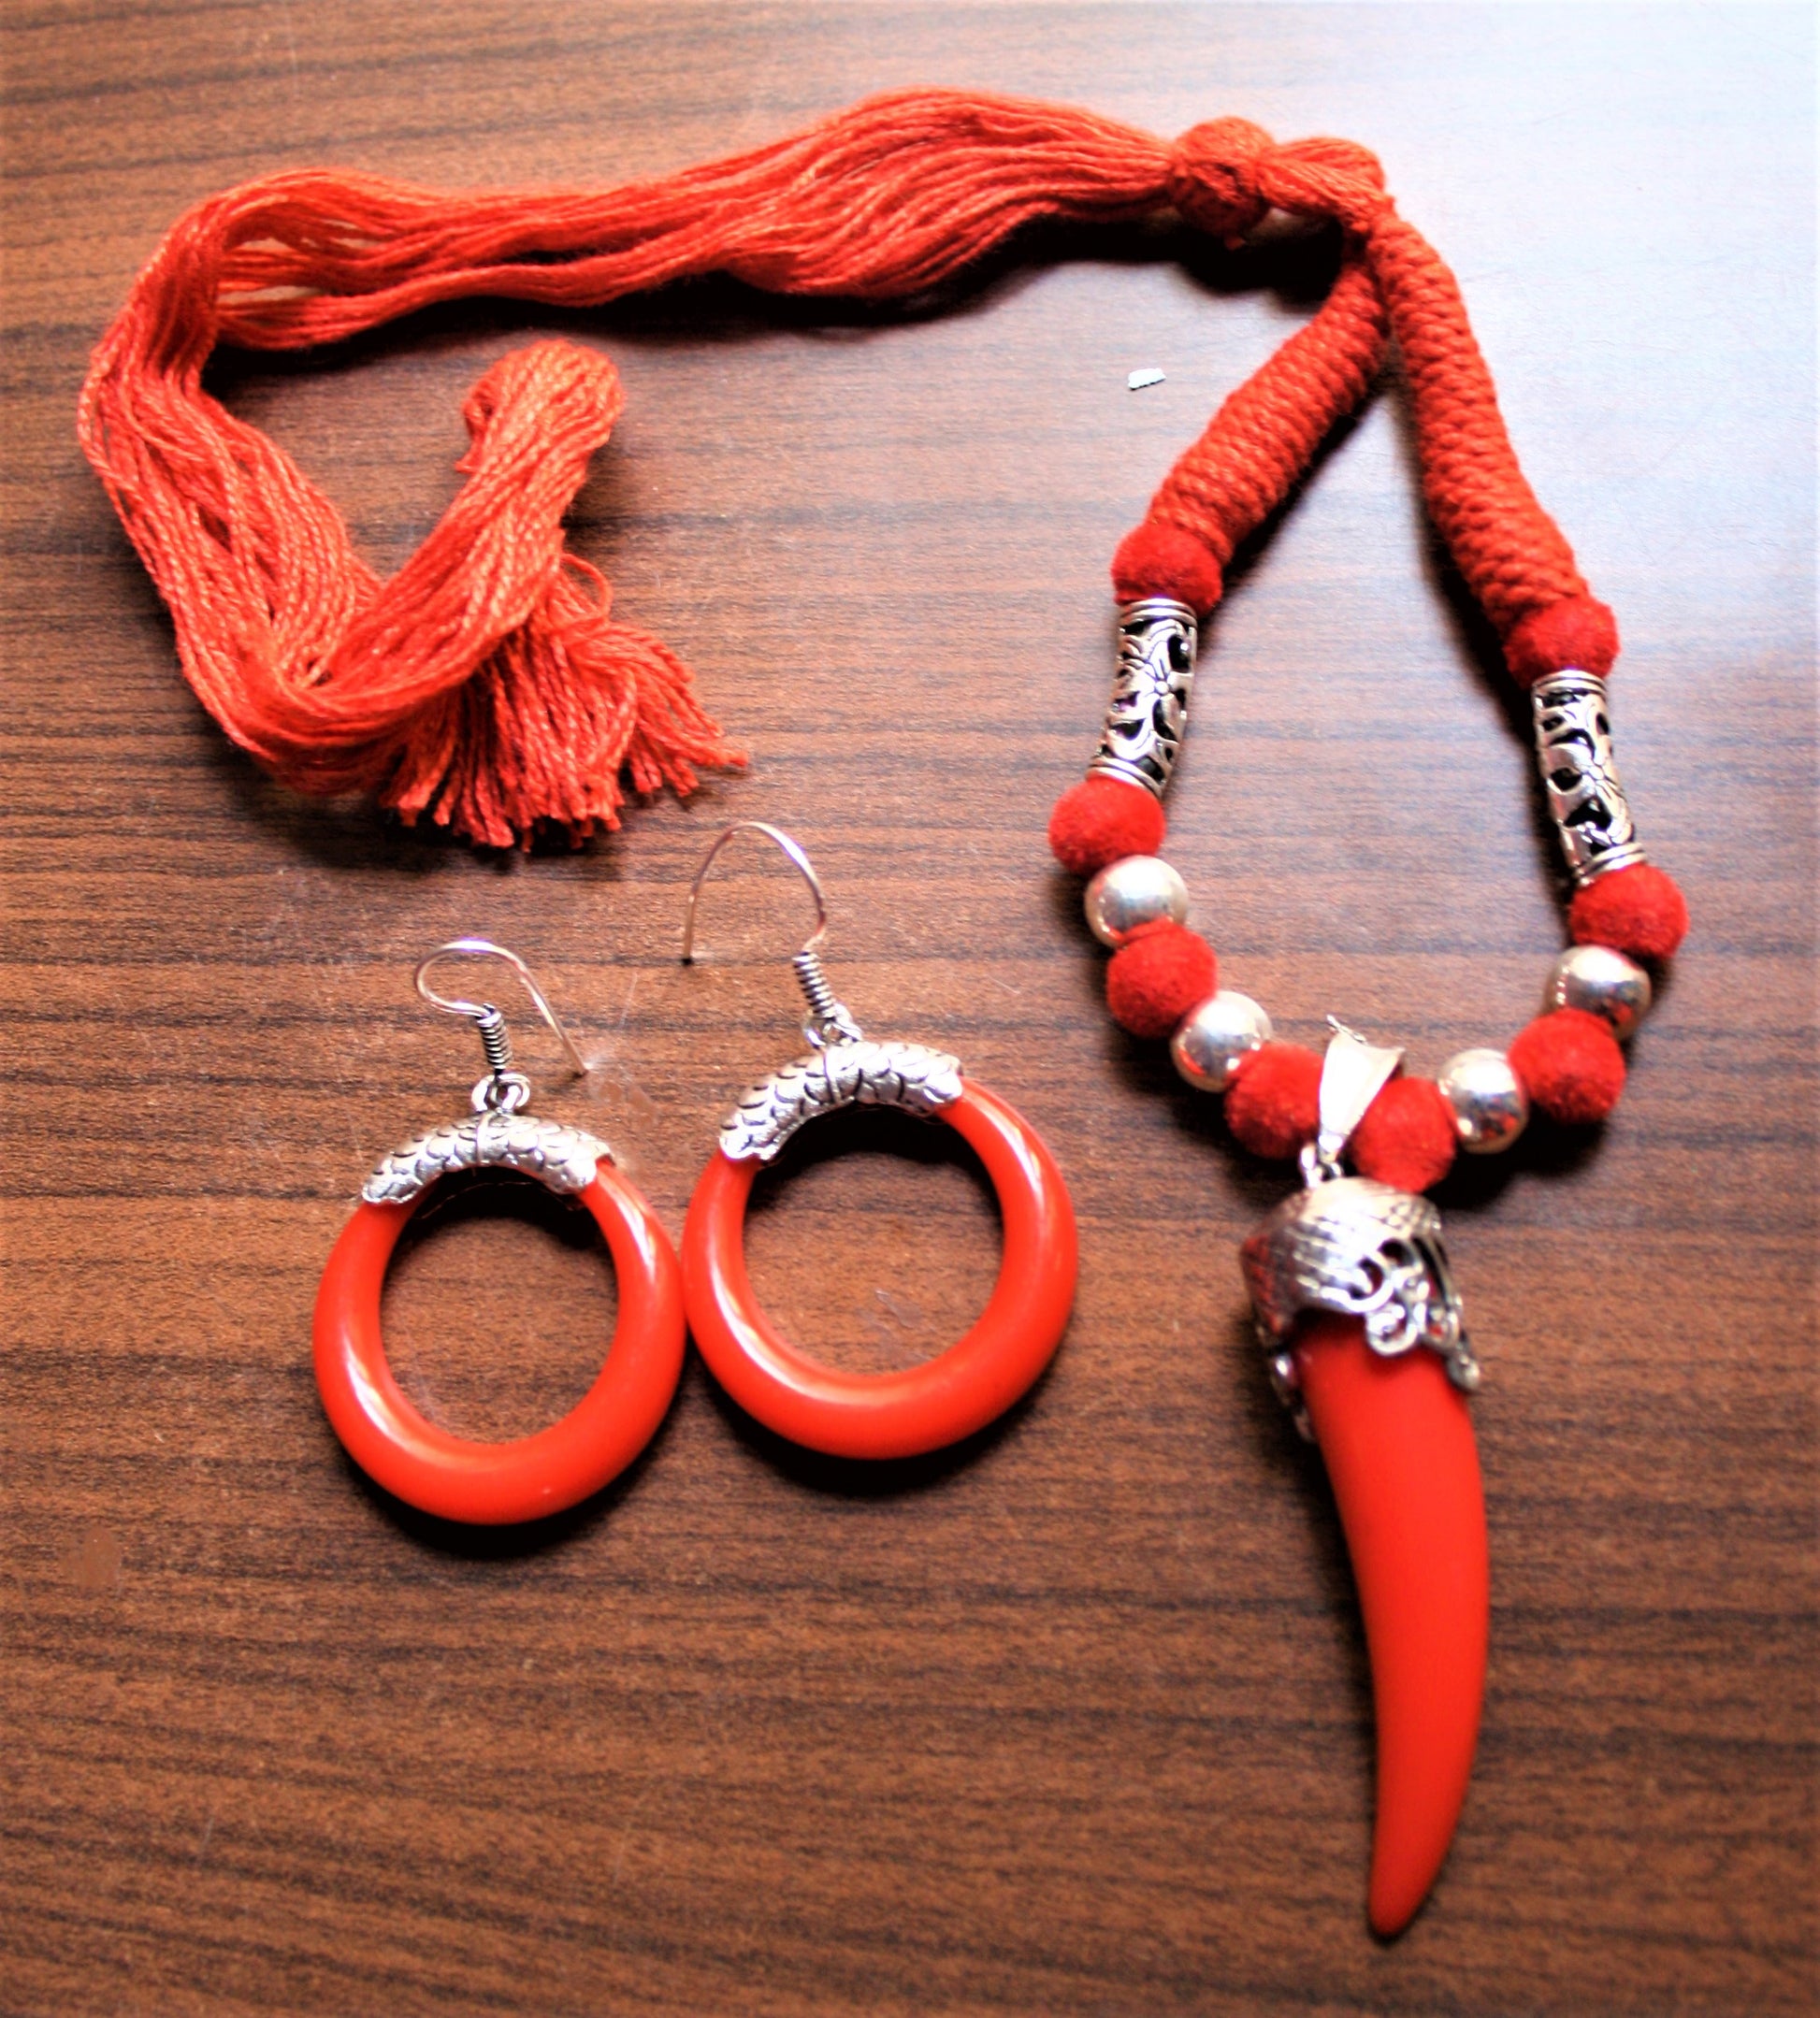 Silver Oxidized Thread Necklace with Chili Pendant and Hoop Danglers - GlitterGleam